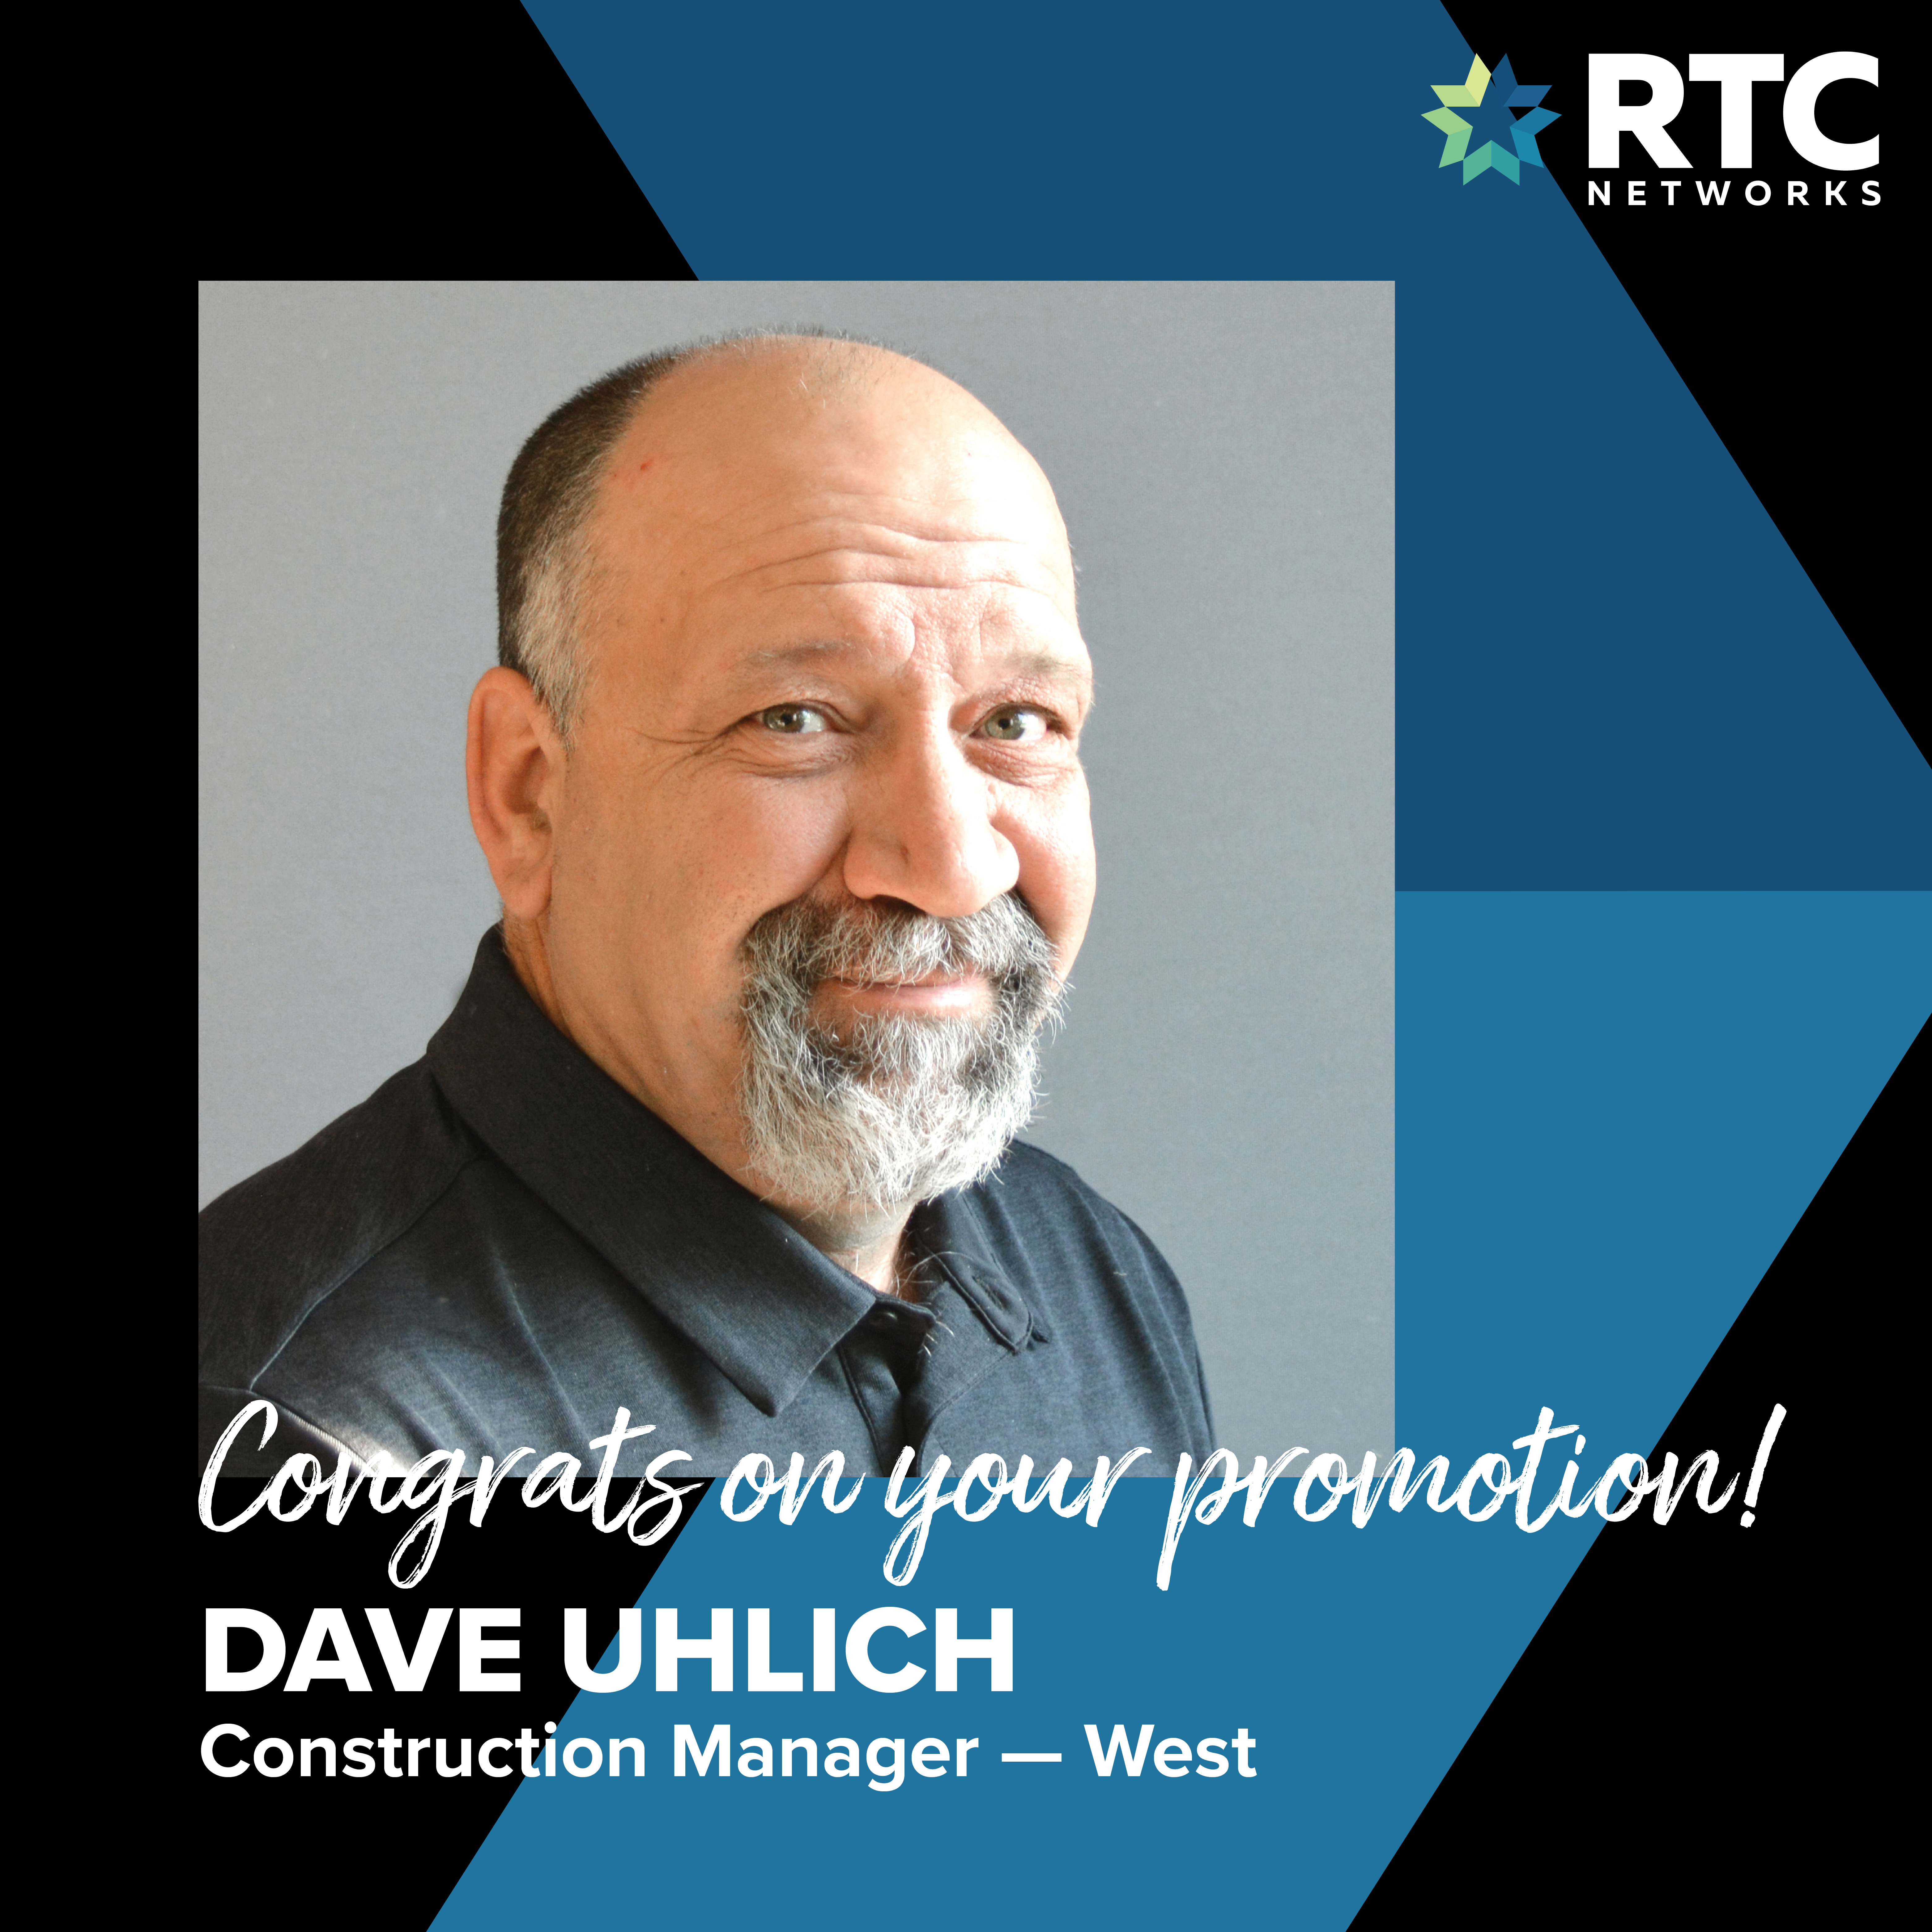 Dave Uhlich promoted to Construction Manager - West